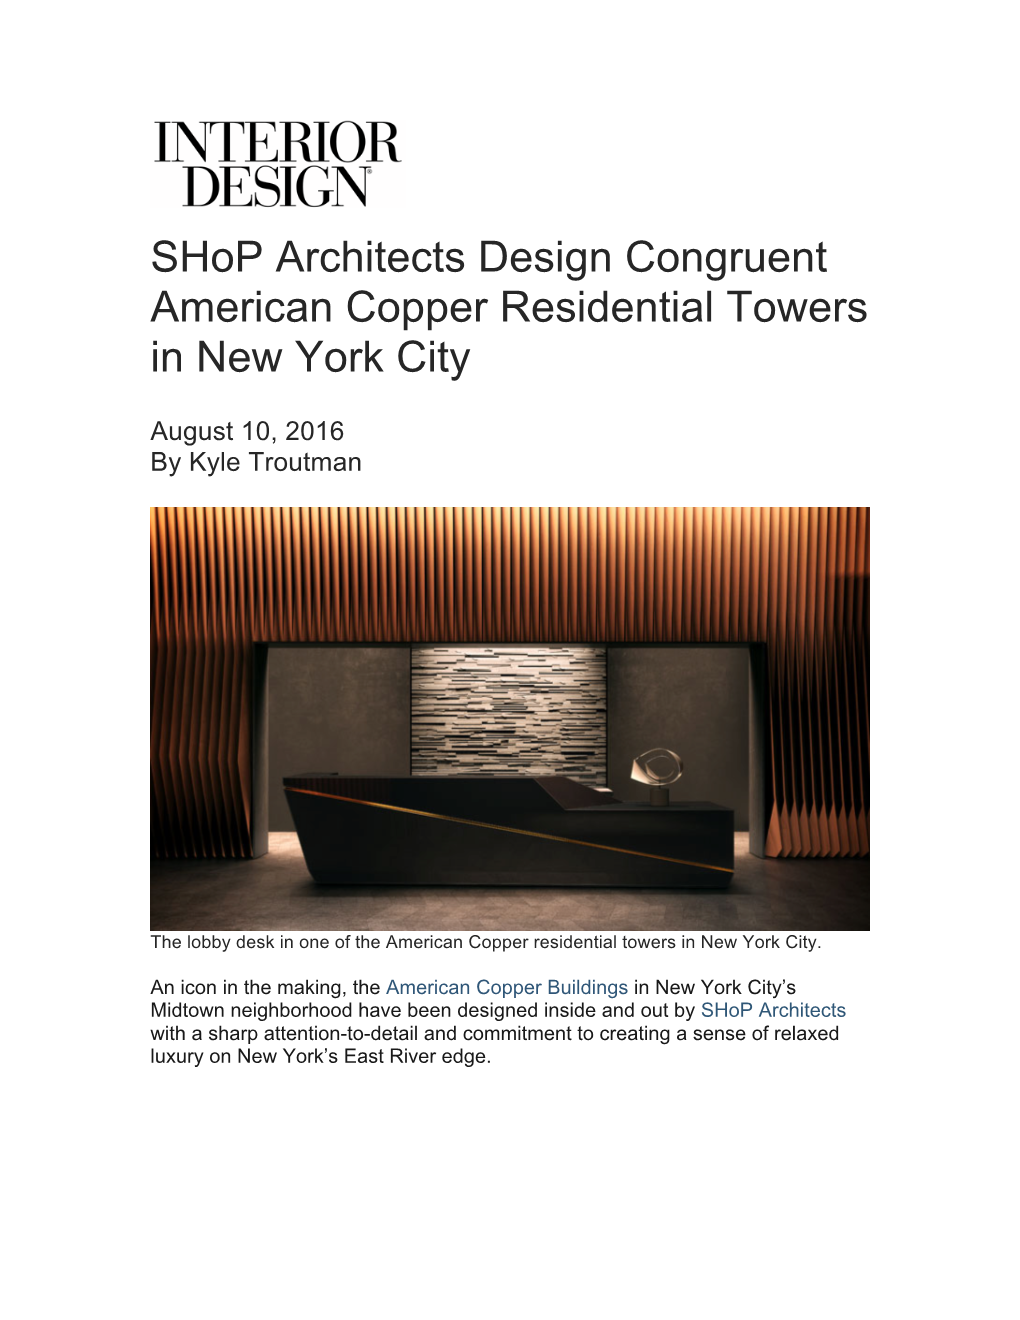 Shop Architects Design Congruent American Copper Residential Towers in New York City